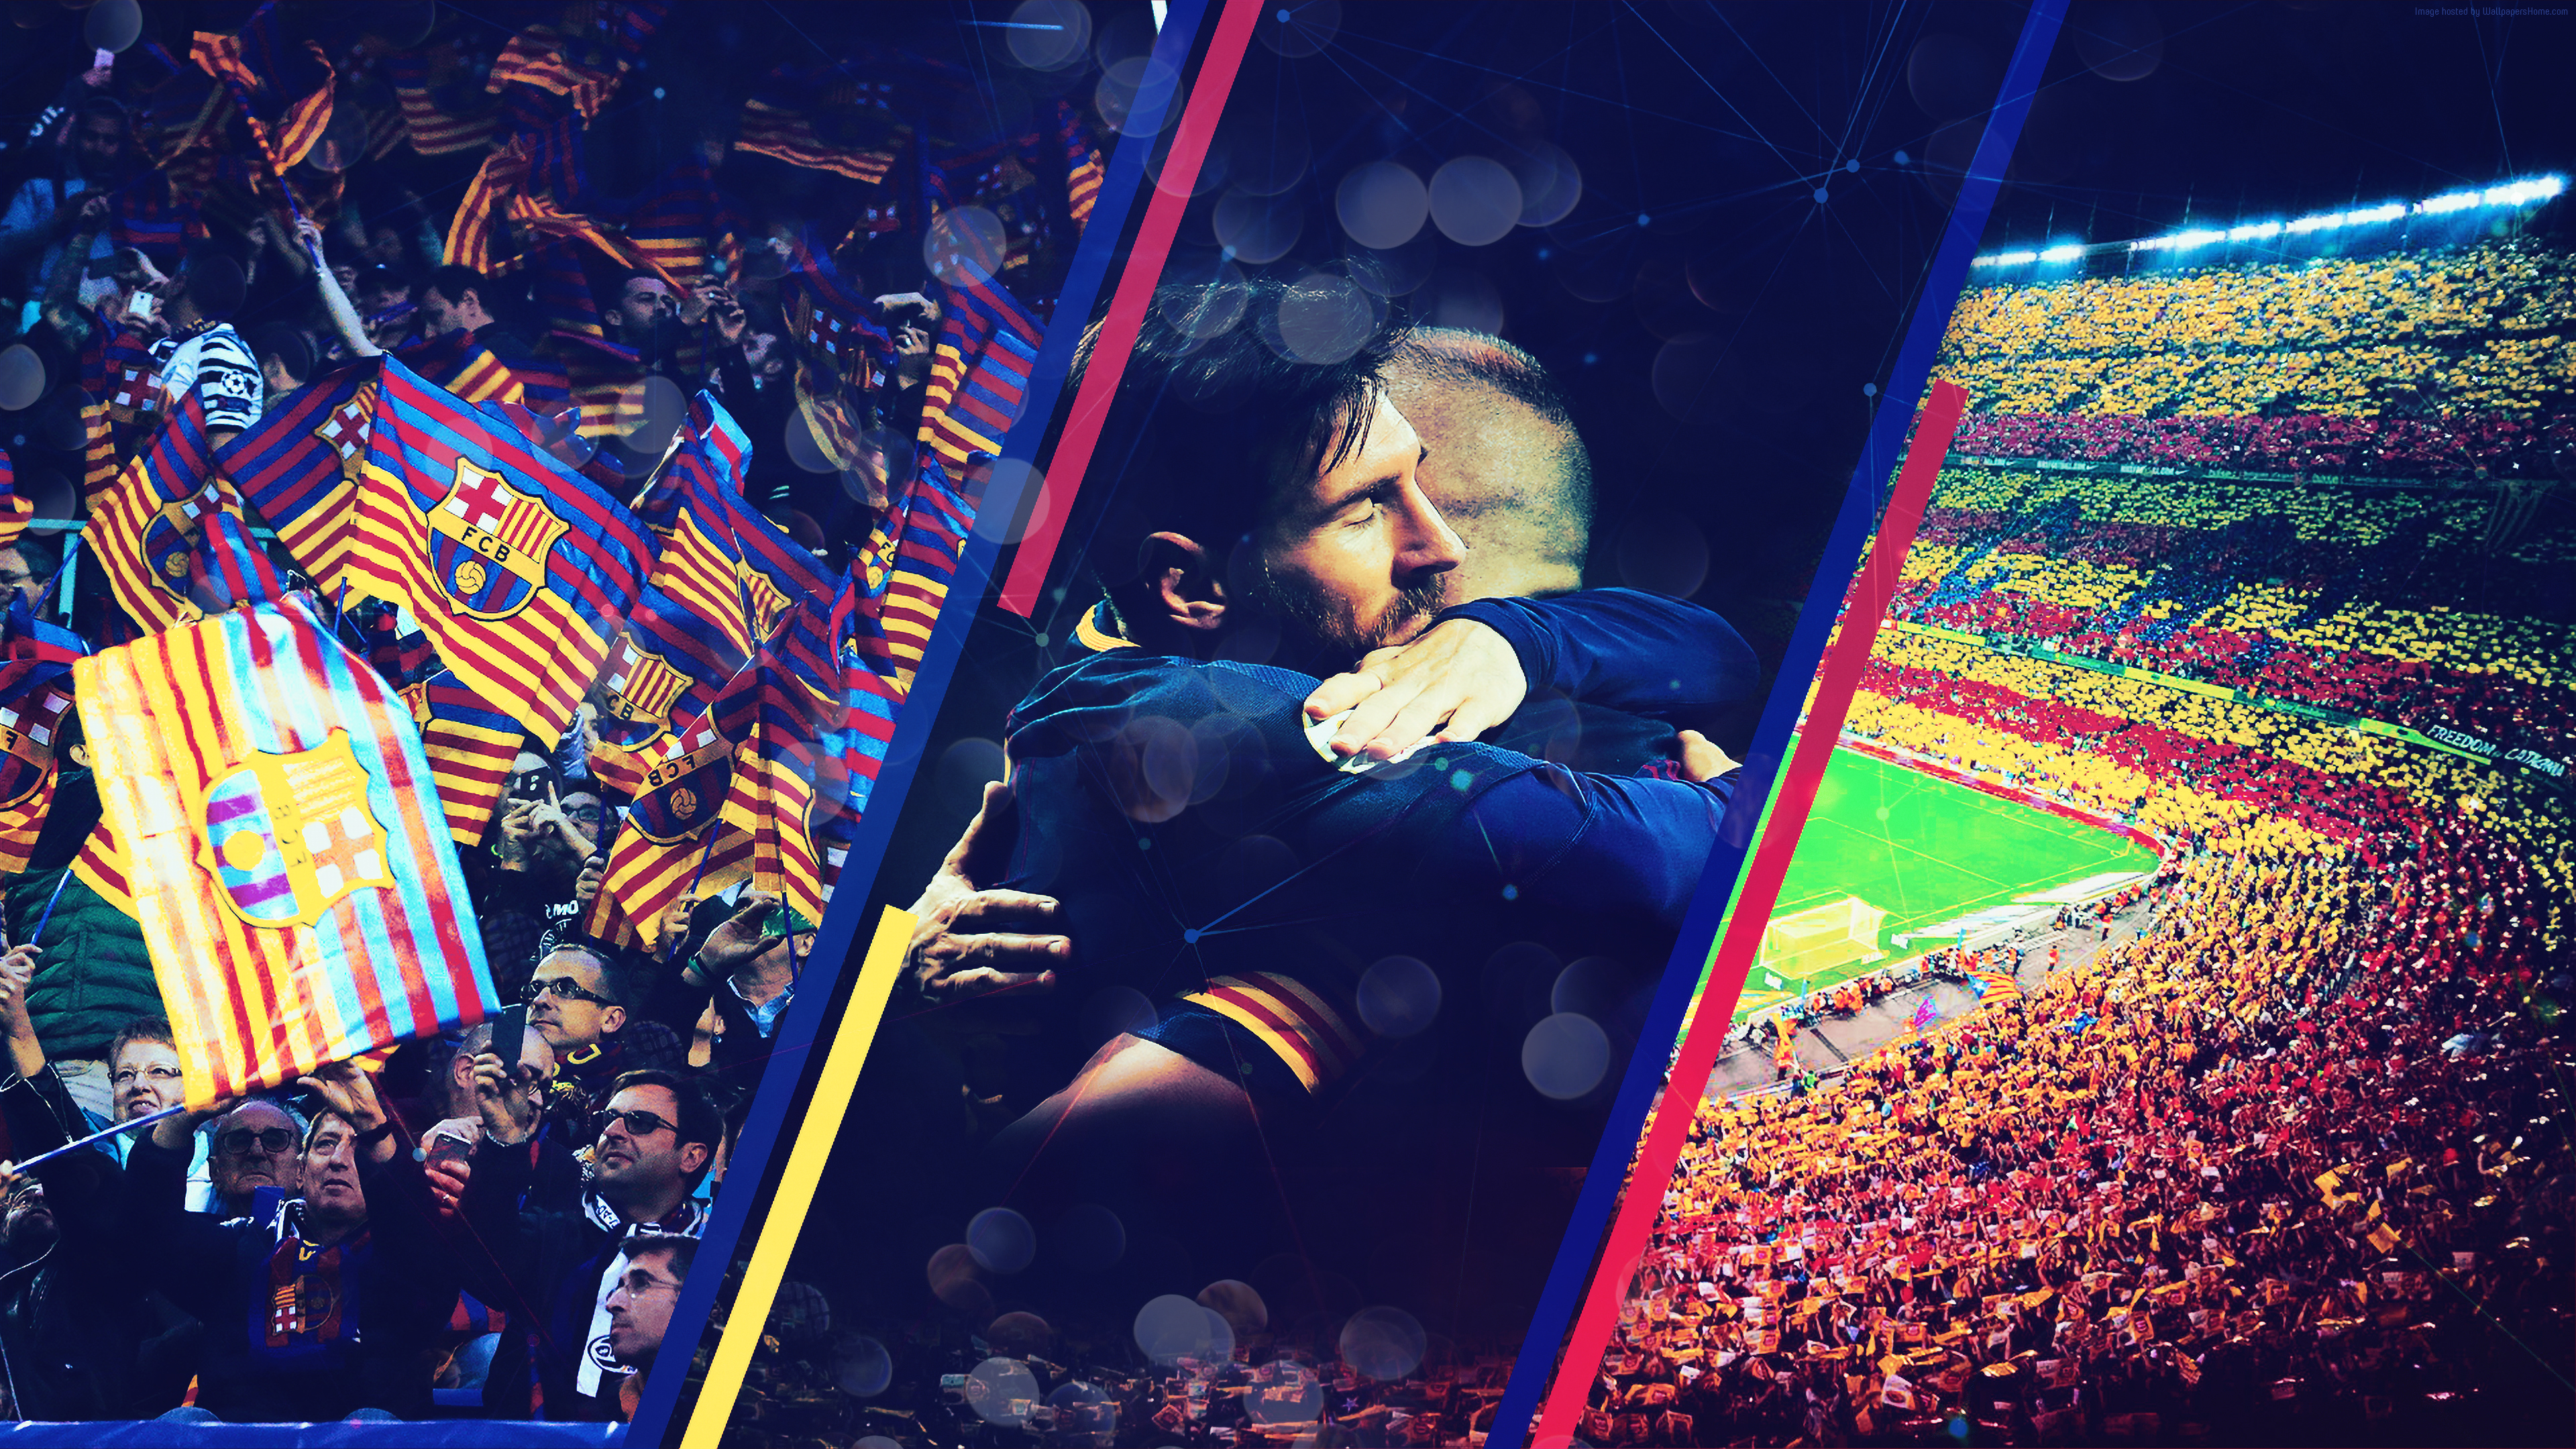 download wallpaper barcelona,photography,fan,crowd,event,performance